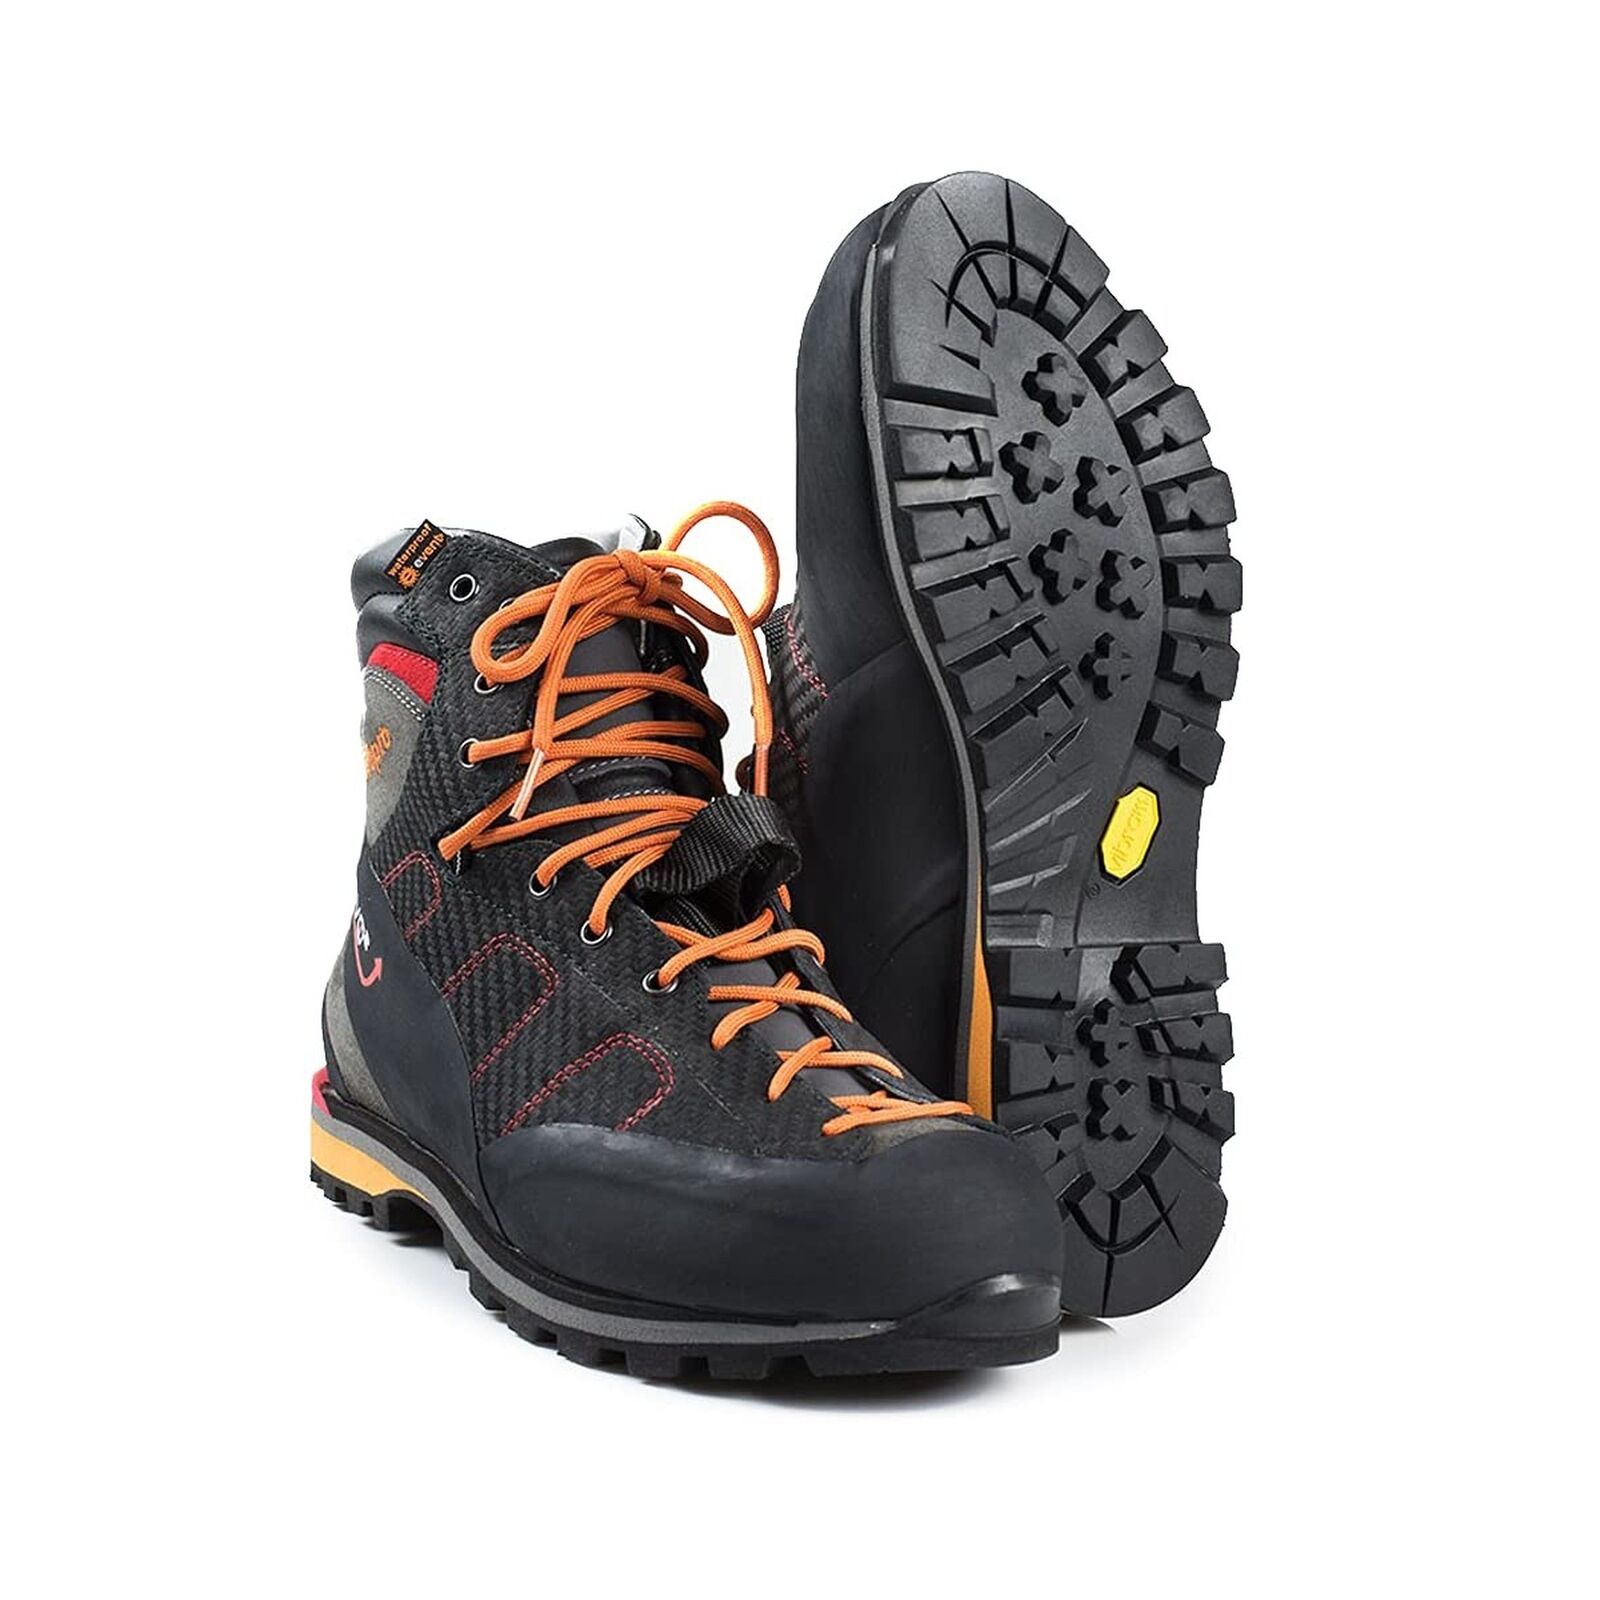 Arbpro EVO 2 Climbing Boots for Arborists, Water Resistant 9.5 Black